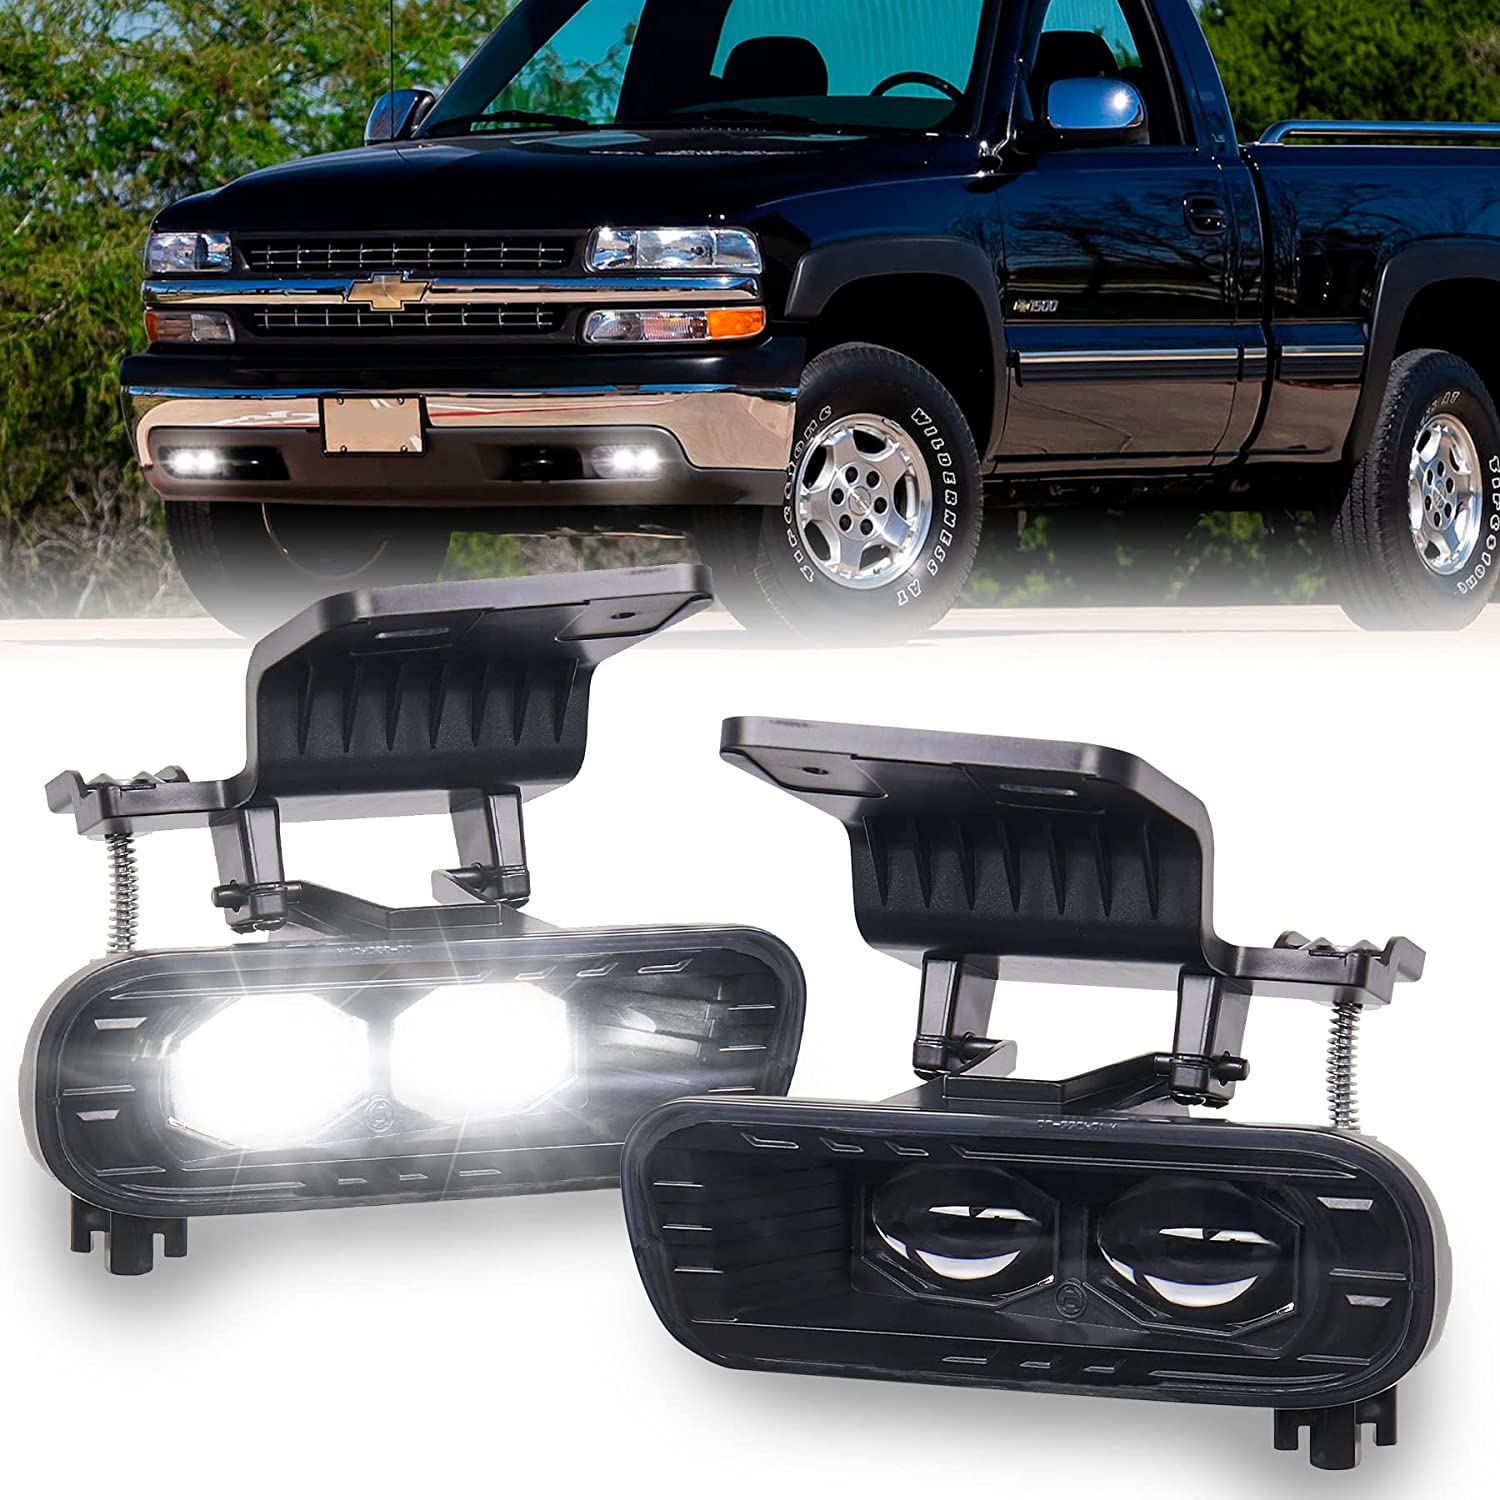 MOVOTOR LED Fog Lights Replacement 300% Bright Bumper Fog Lamps Compatible with 1999-2002 Chevy Silverado 1500 2500, 2000-2001 Silverado 3500, 2000-2006 Chevrolet Suburban Tahoe